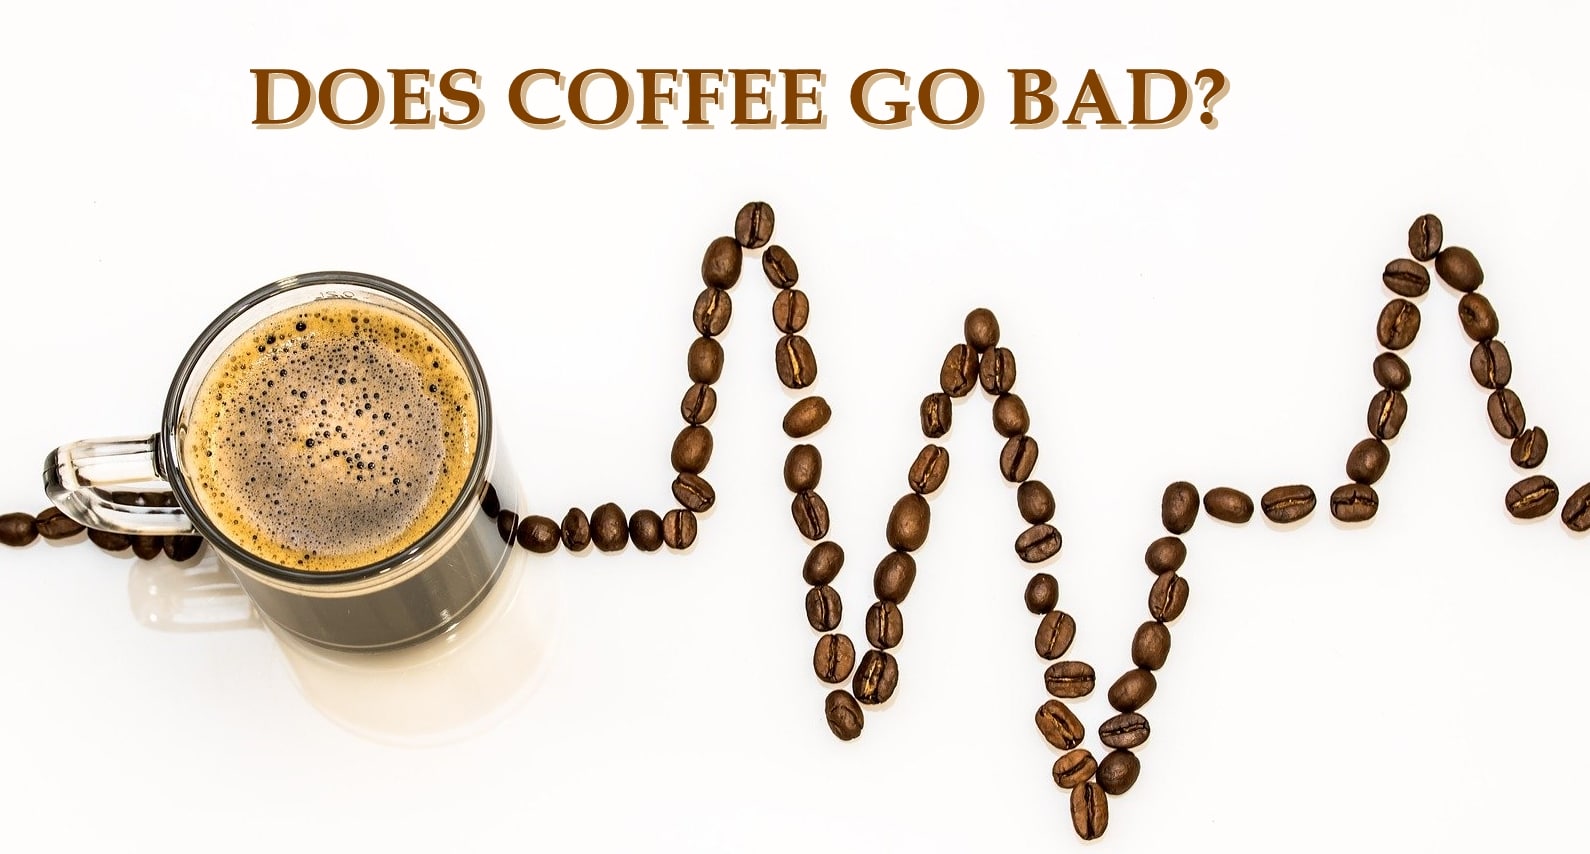 DOES COFFEE GO BAD